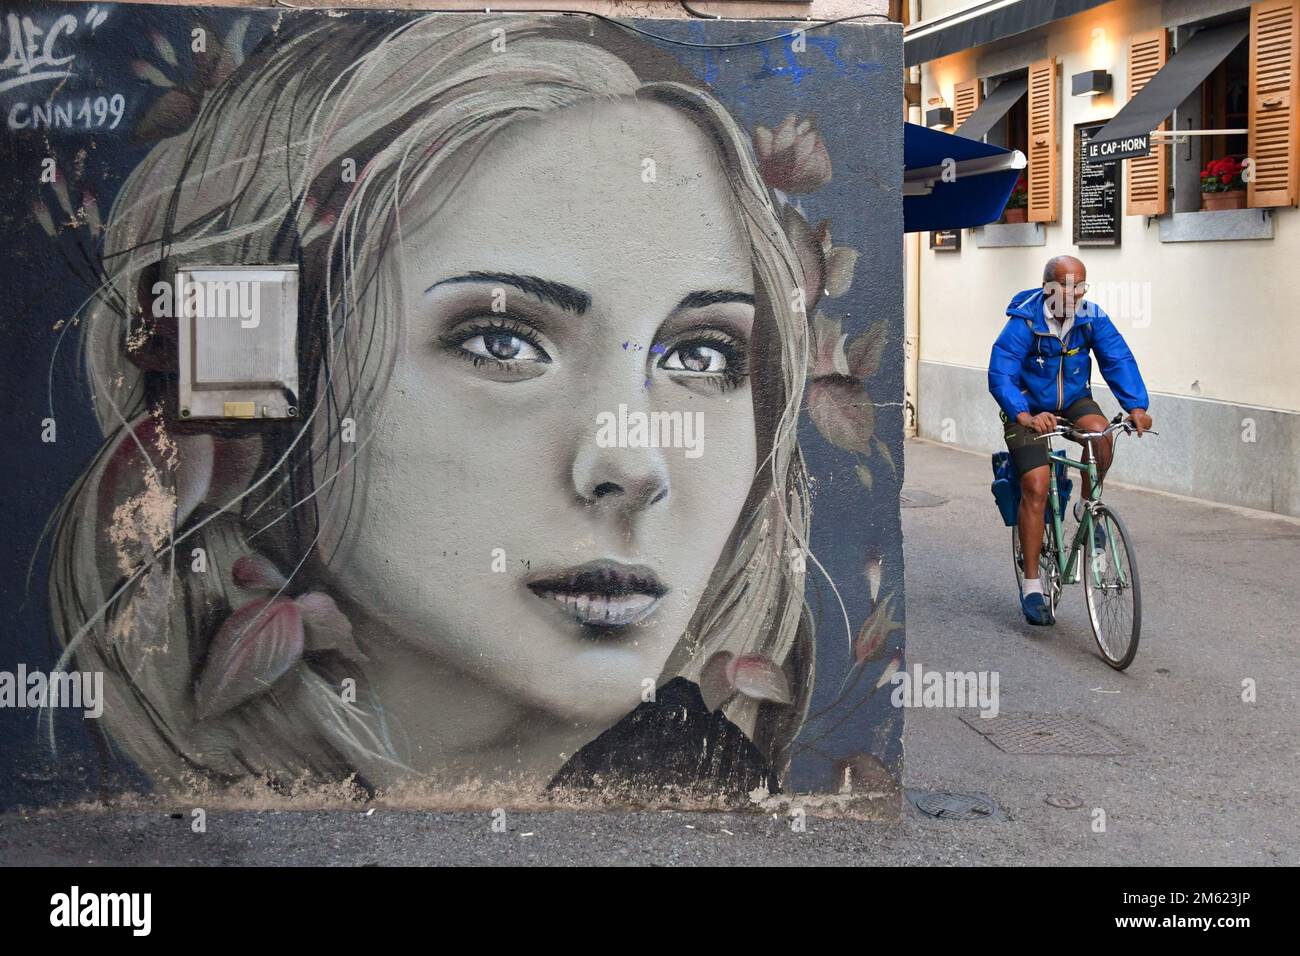 Detail of a mural by the street artist Laetitia Cefali depicting the portrait of a girl on a wall in Rue des Moulins, Chamonix, Rhone Alpes, France Stock Photo